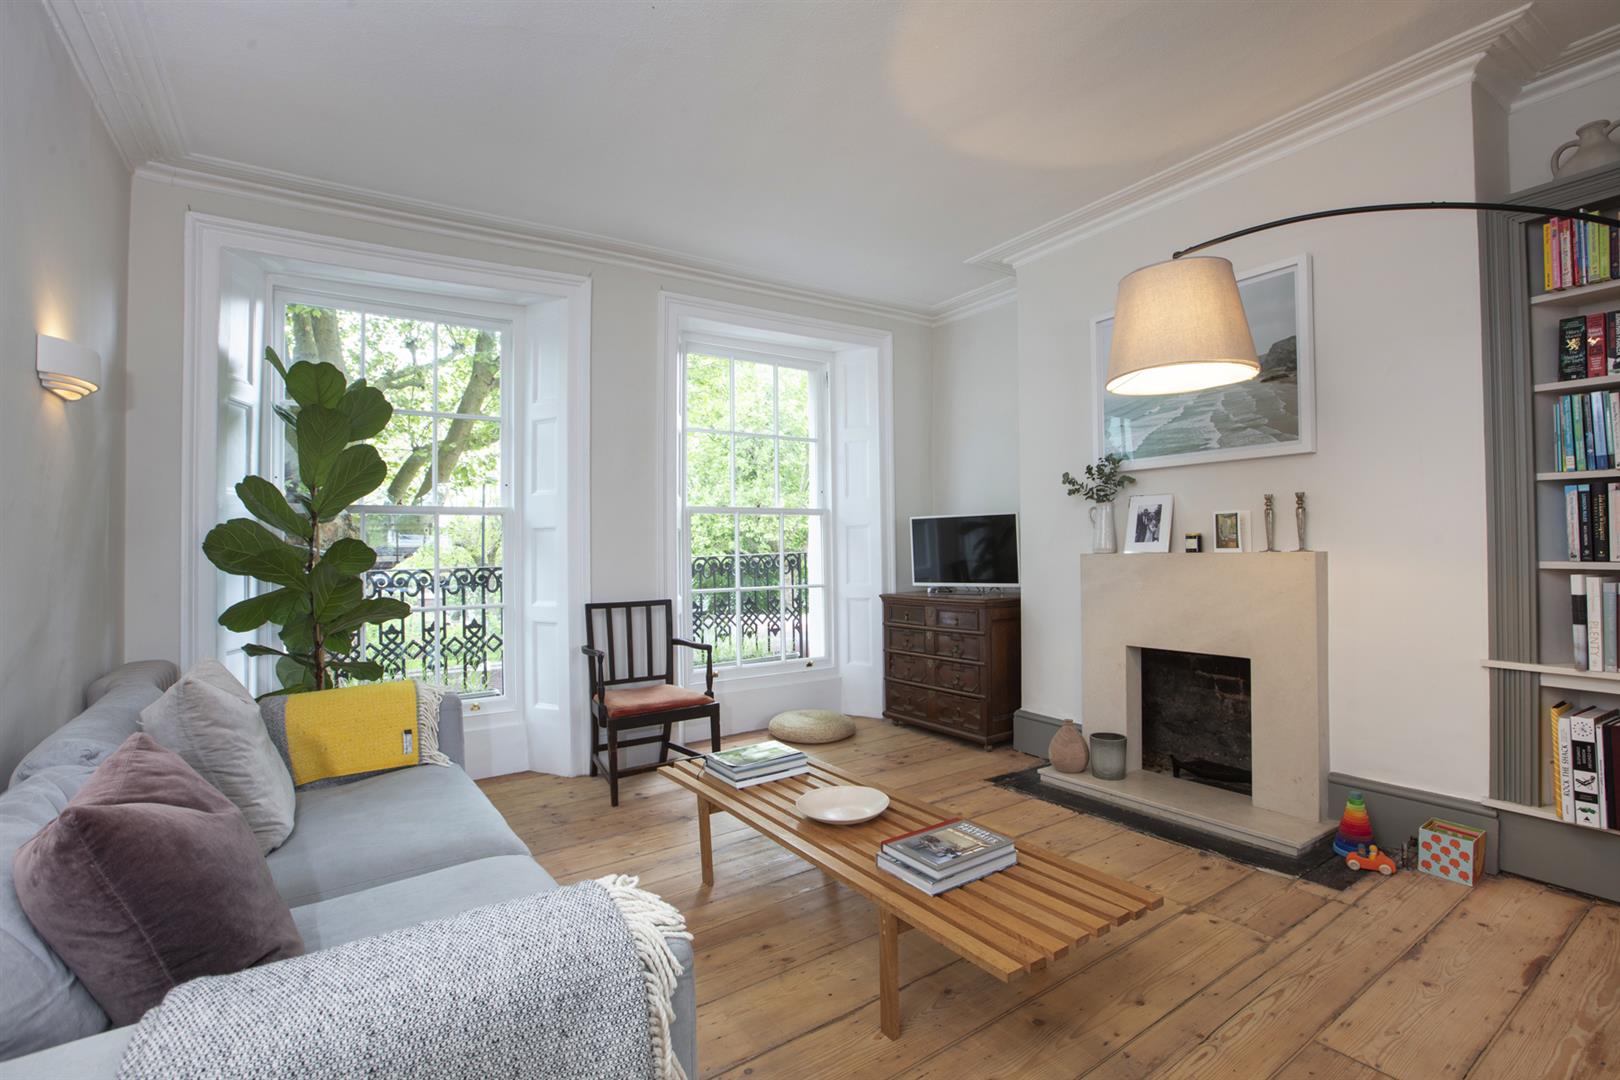 Flat - Conversion For Sale in Grove Lane, Camberwell, SE5 944 view2